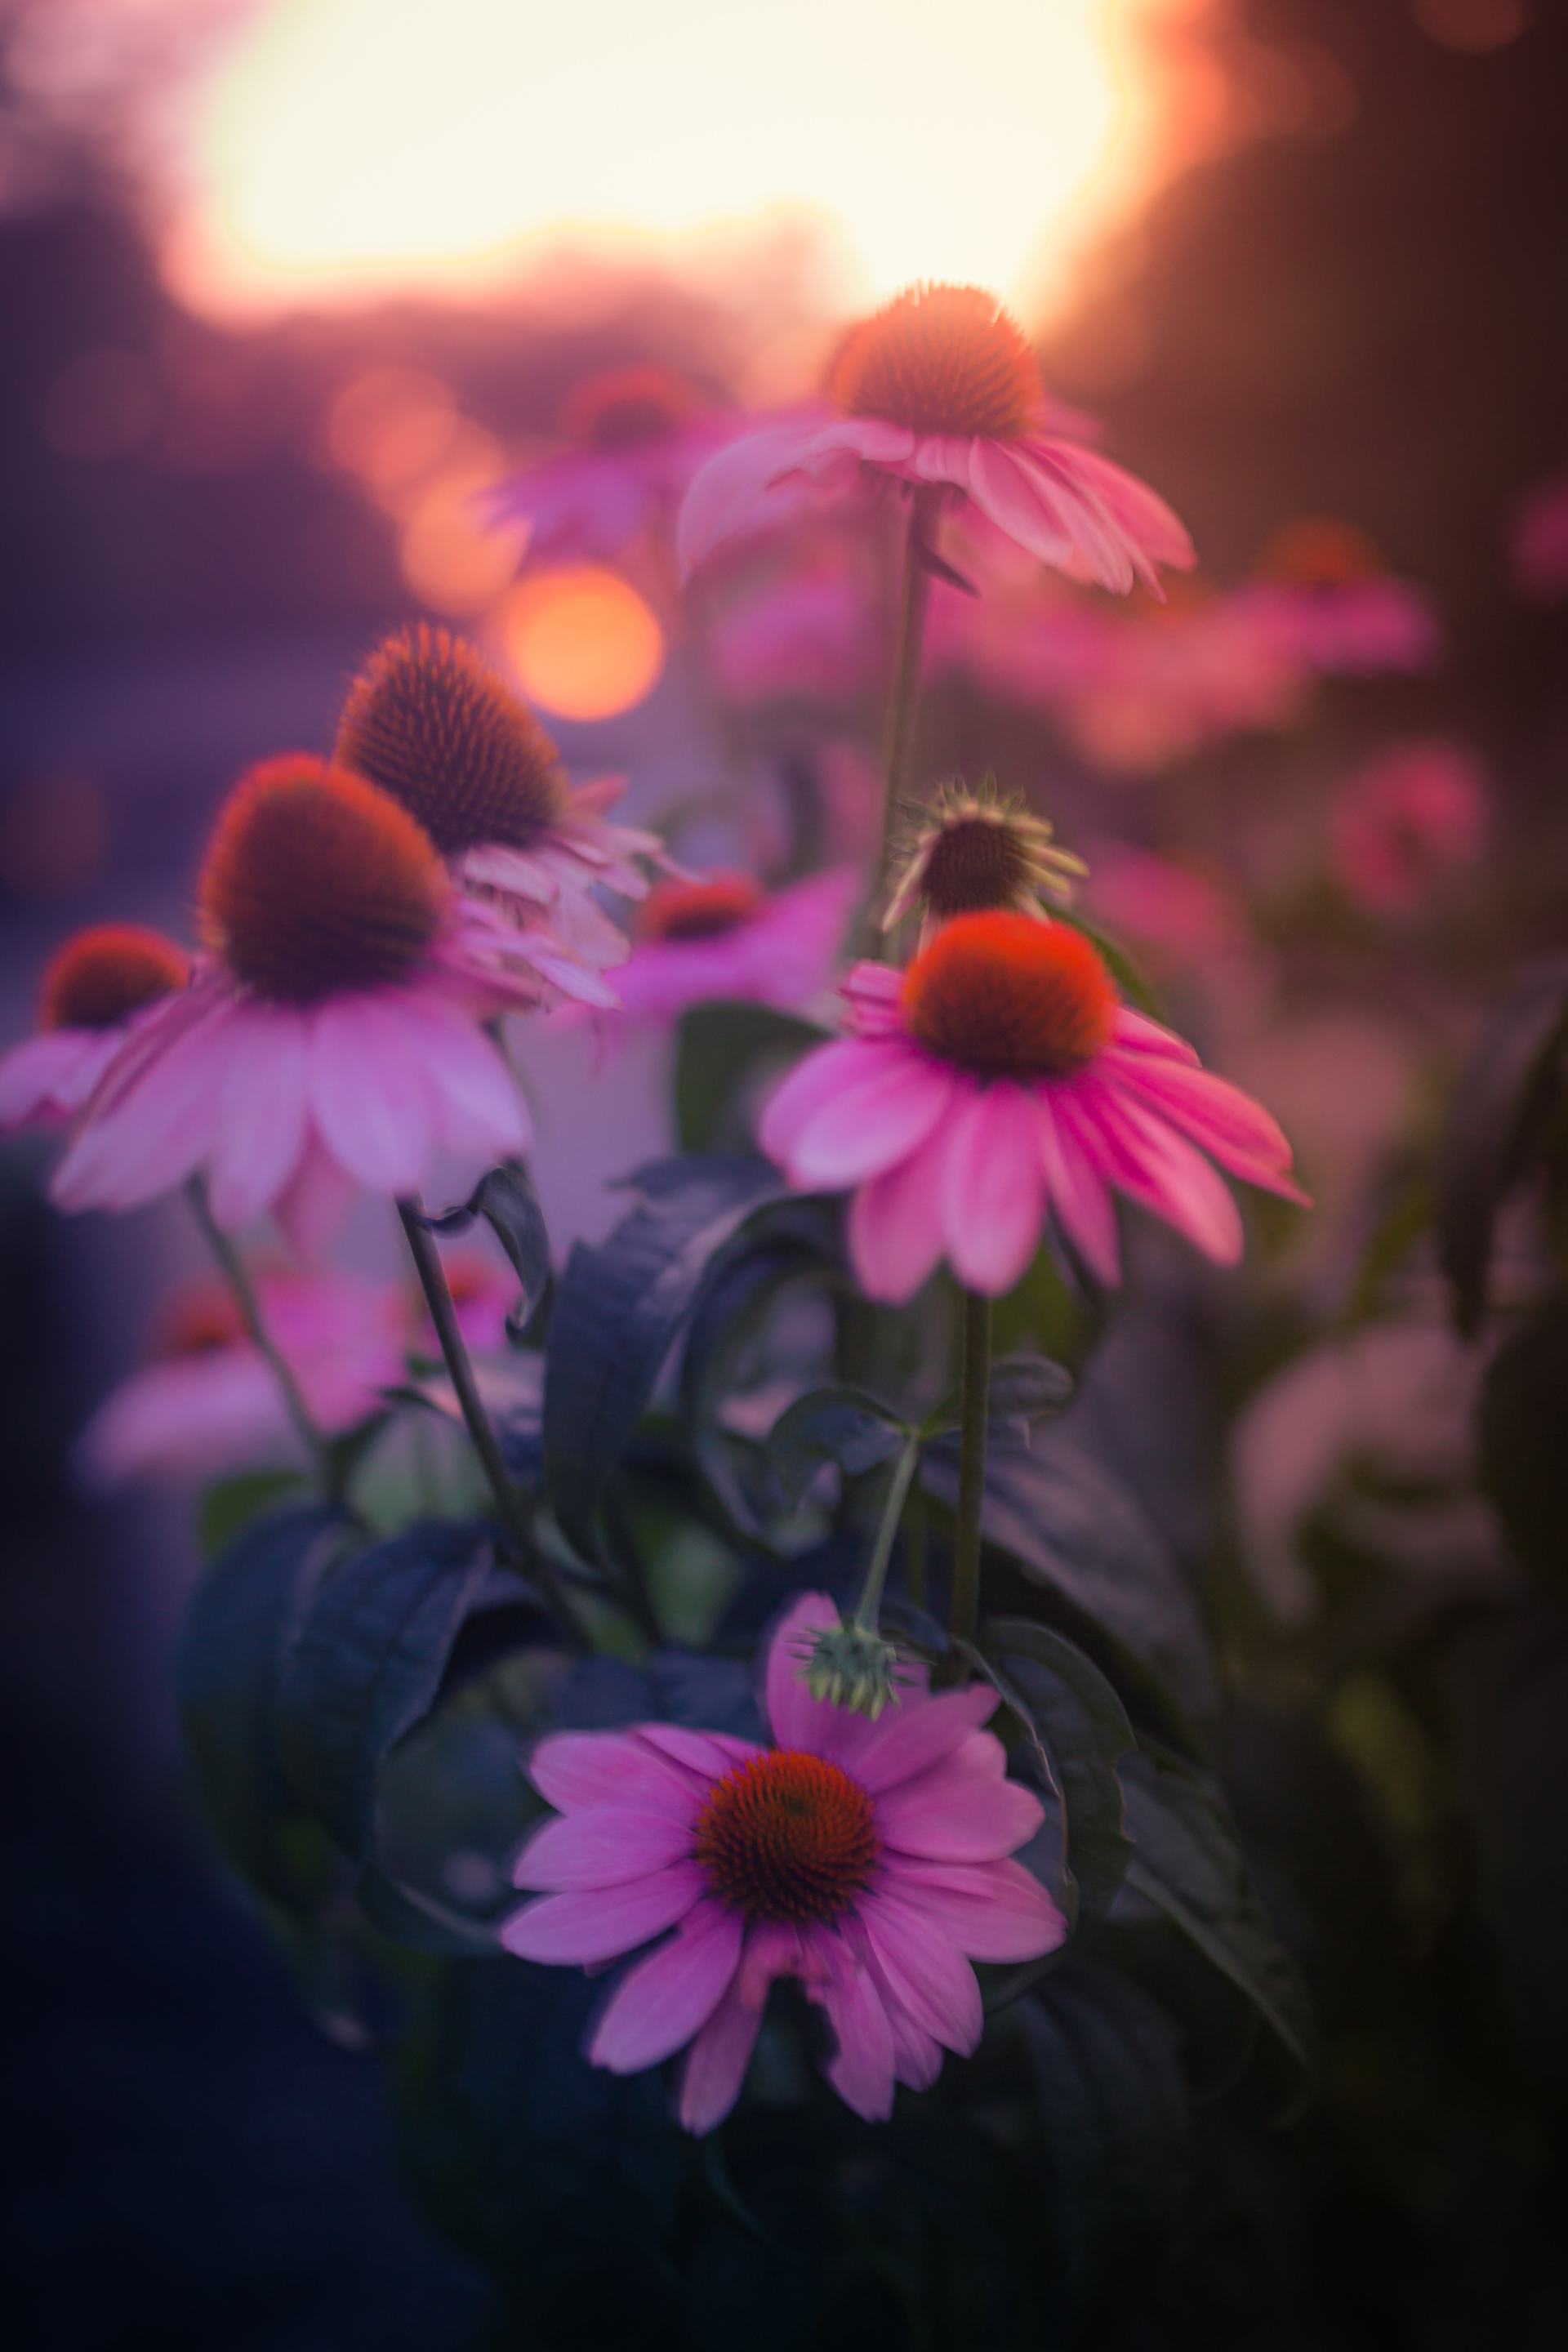 35mm out of focus photograph of a bunch of purple coneflowers backlight by a striking sunset and smooth bokeh. The echinacea blossoms are set glowing in powerful pastel pink and purple tones.